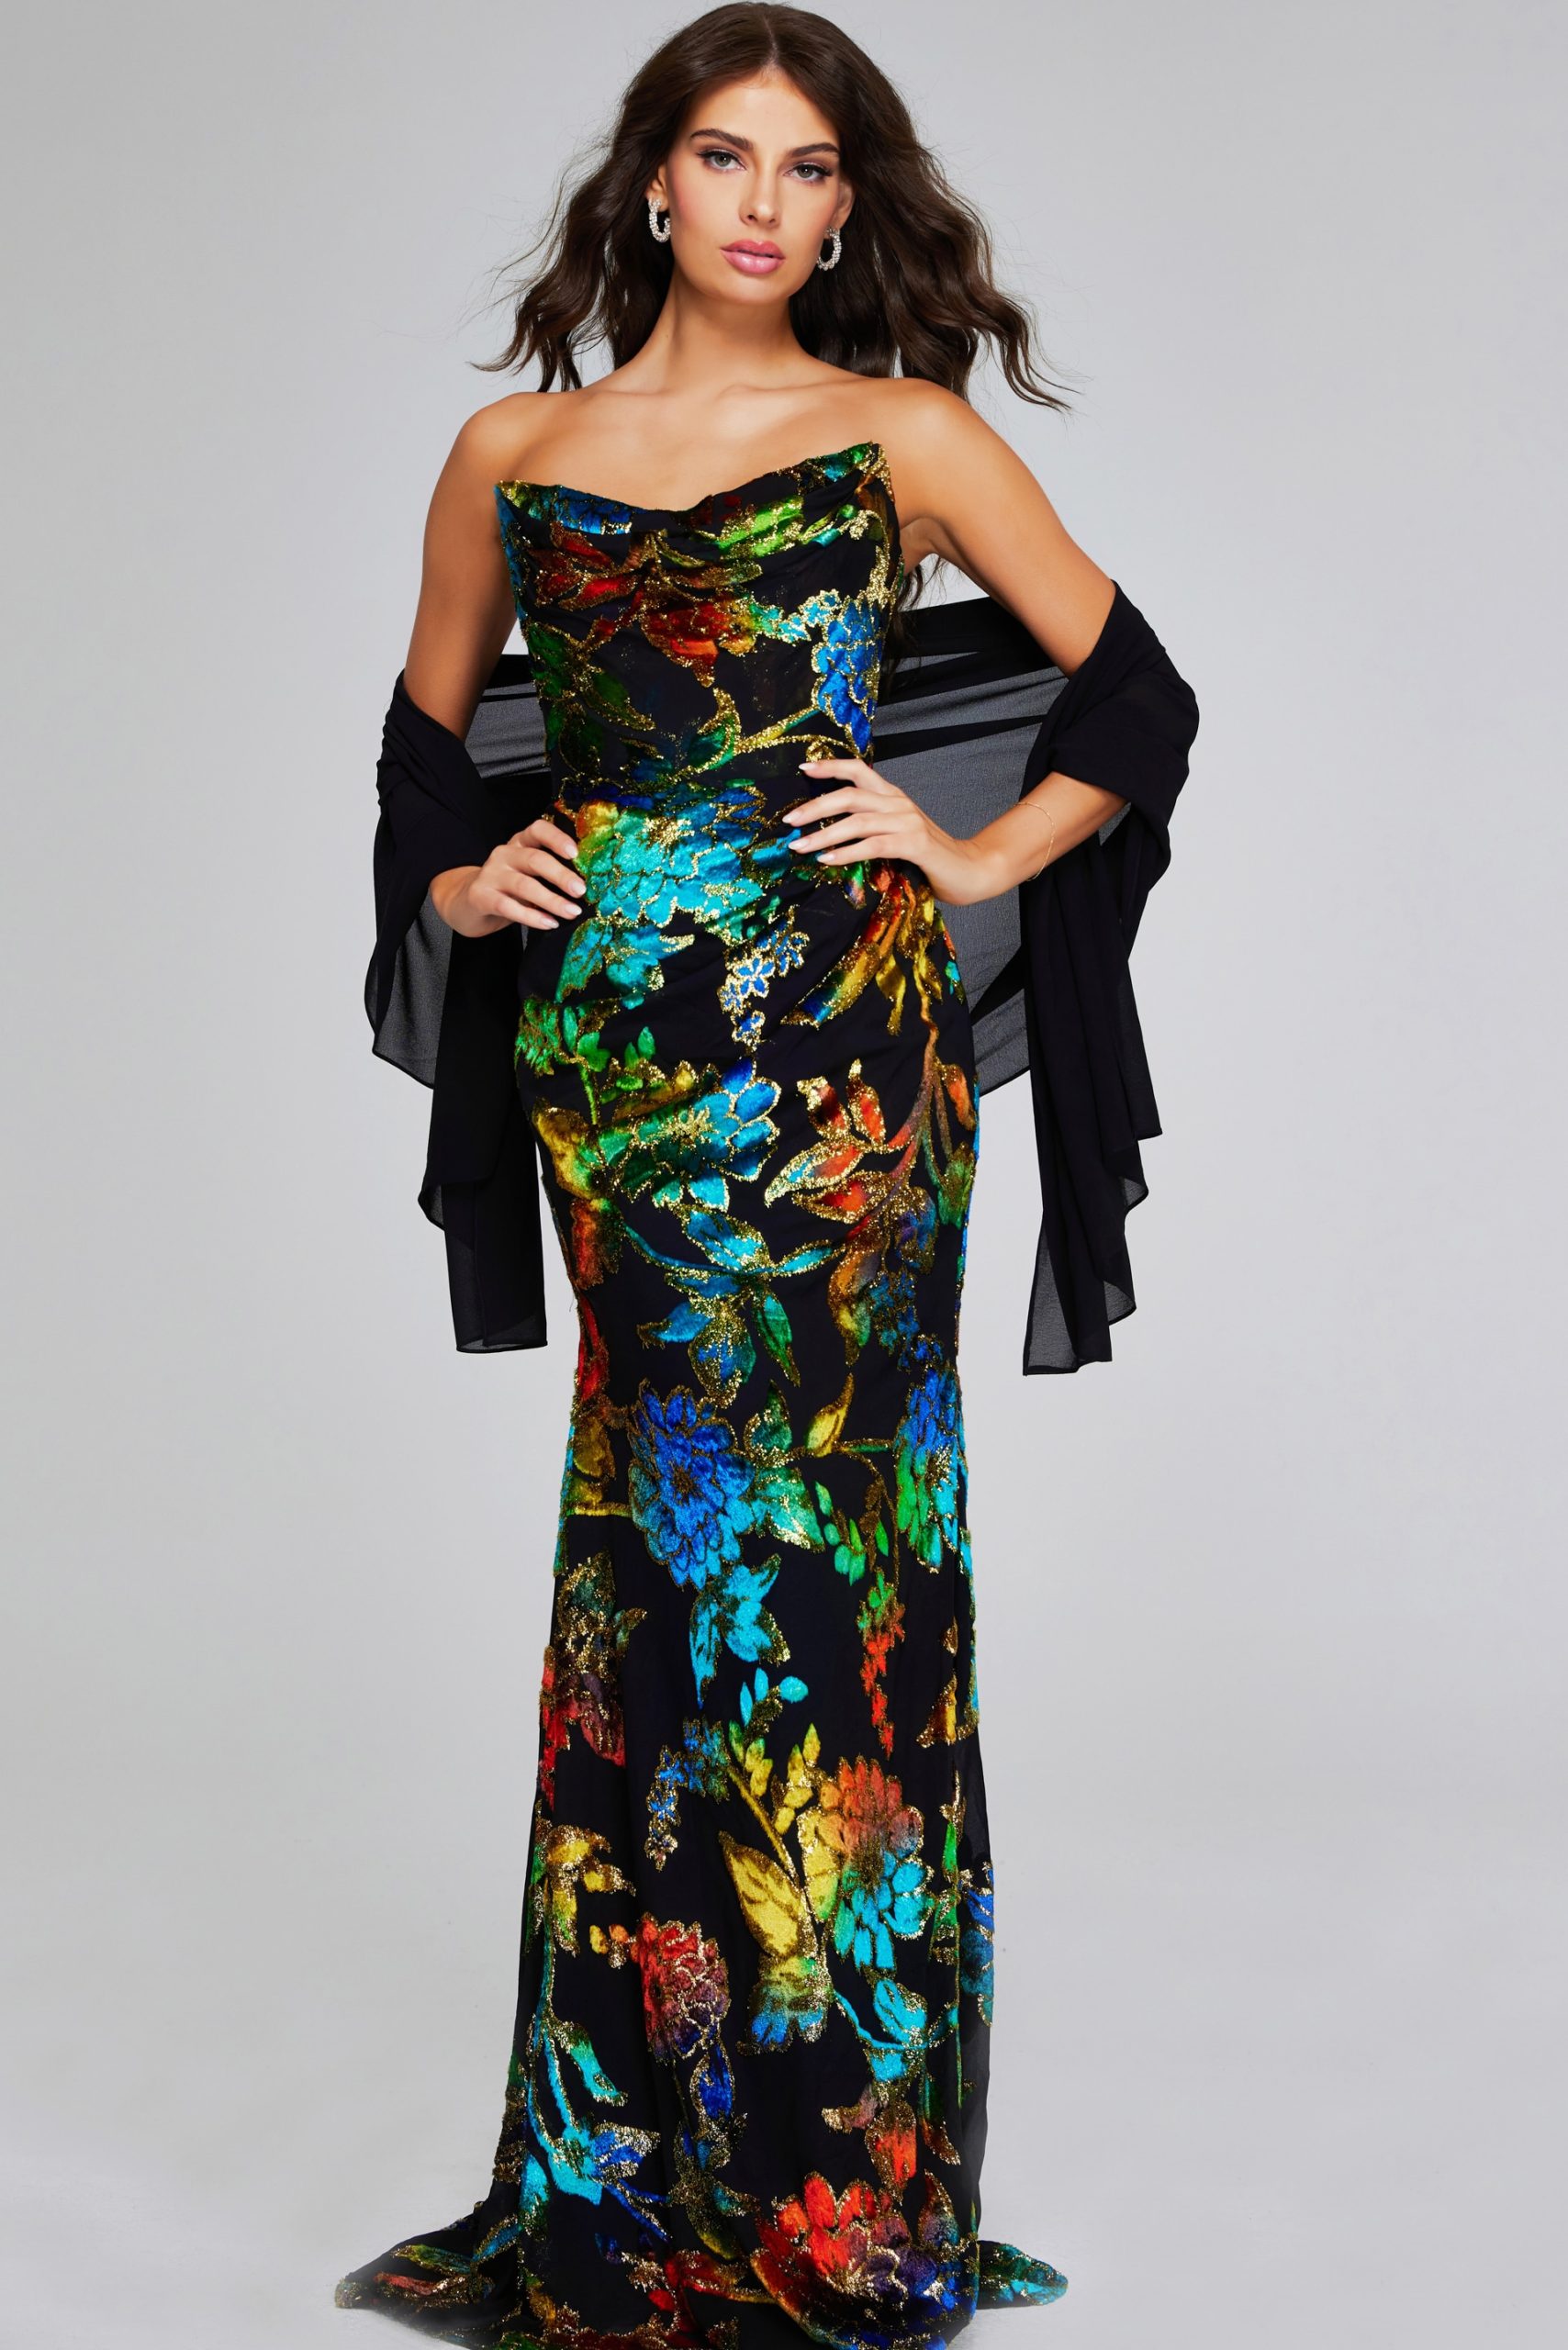 Elegant Multi-Color Strapless Gown with Vibrant Floral Pattern 42164